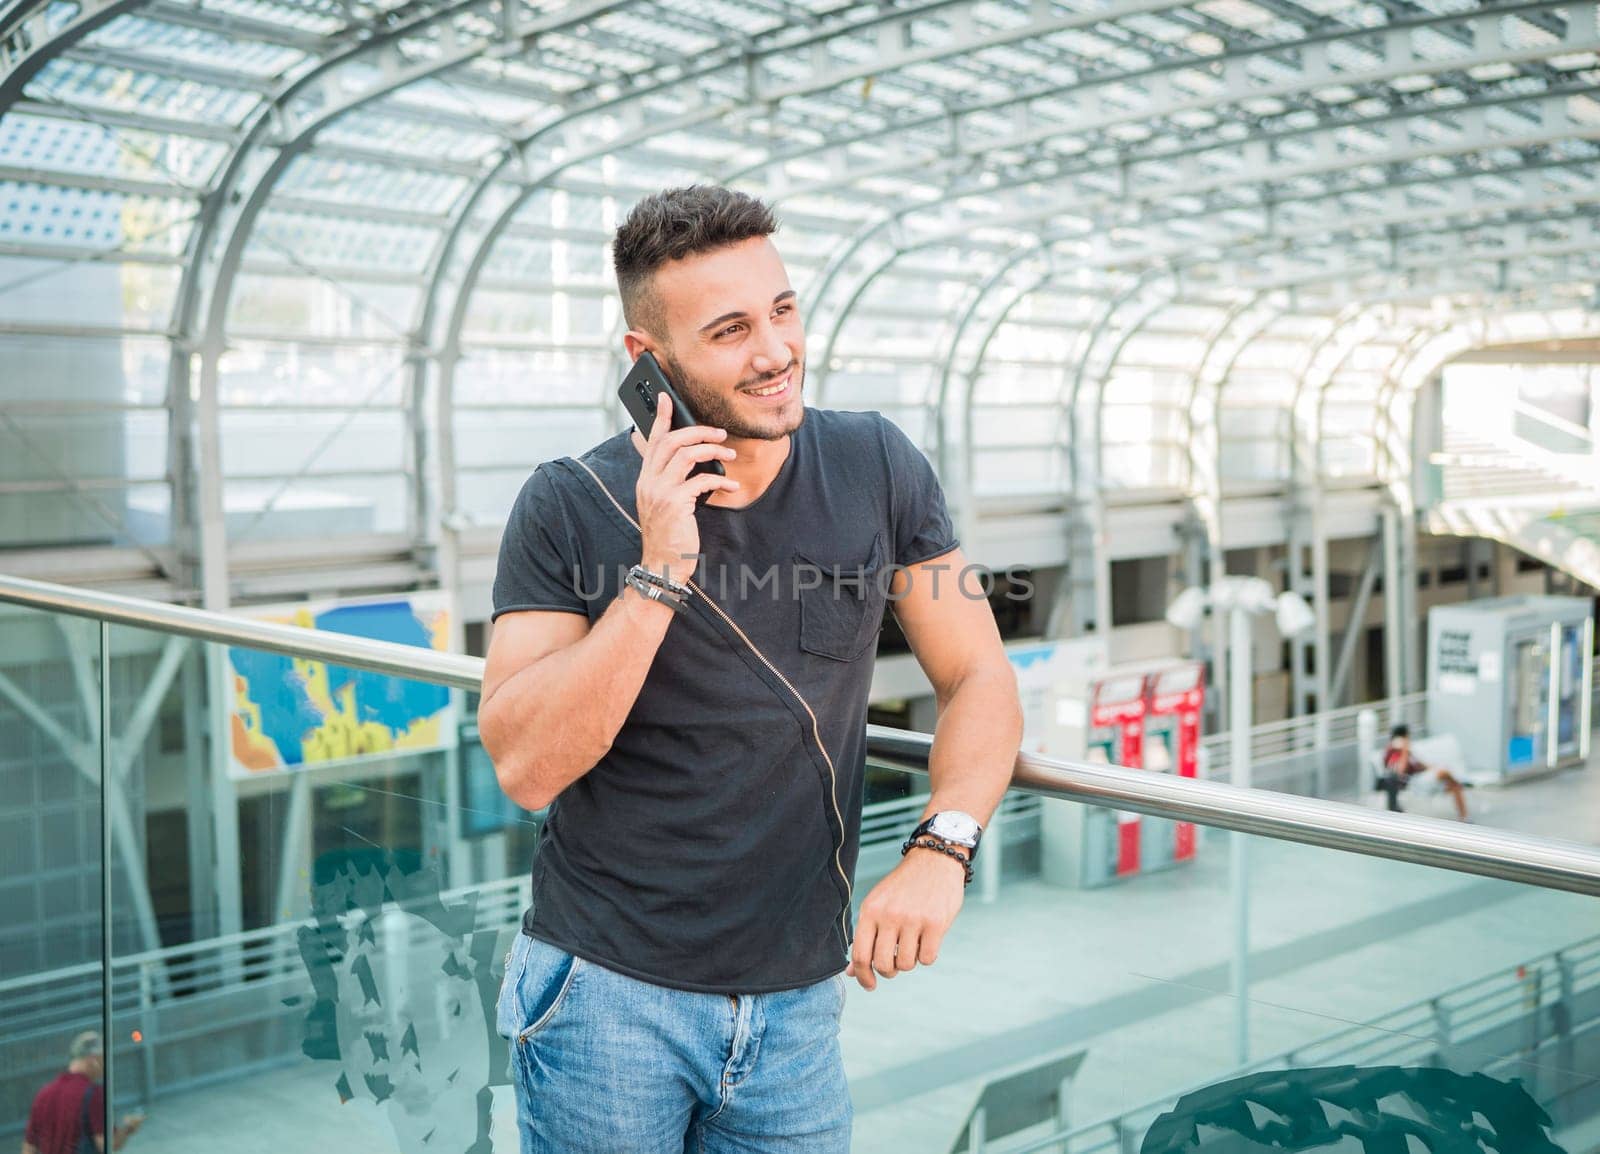 A man standing on a balcony talking on a cell phone. Photo of a young and handsome man talking on a cell phone while standing on a balcony in a modern train station